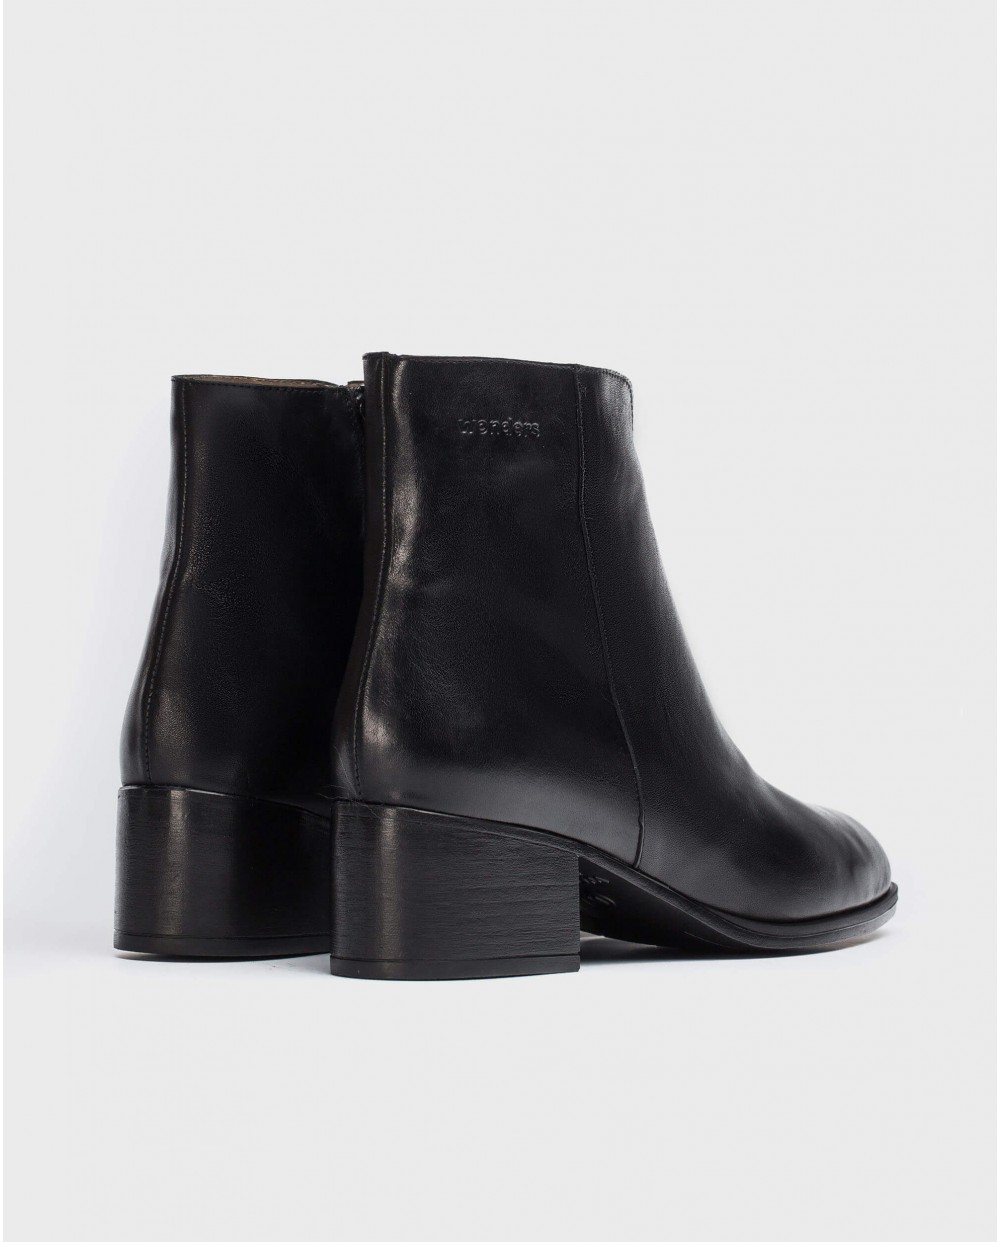 Wonders-Ankle Boots-Ankle boot with front cut out detail